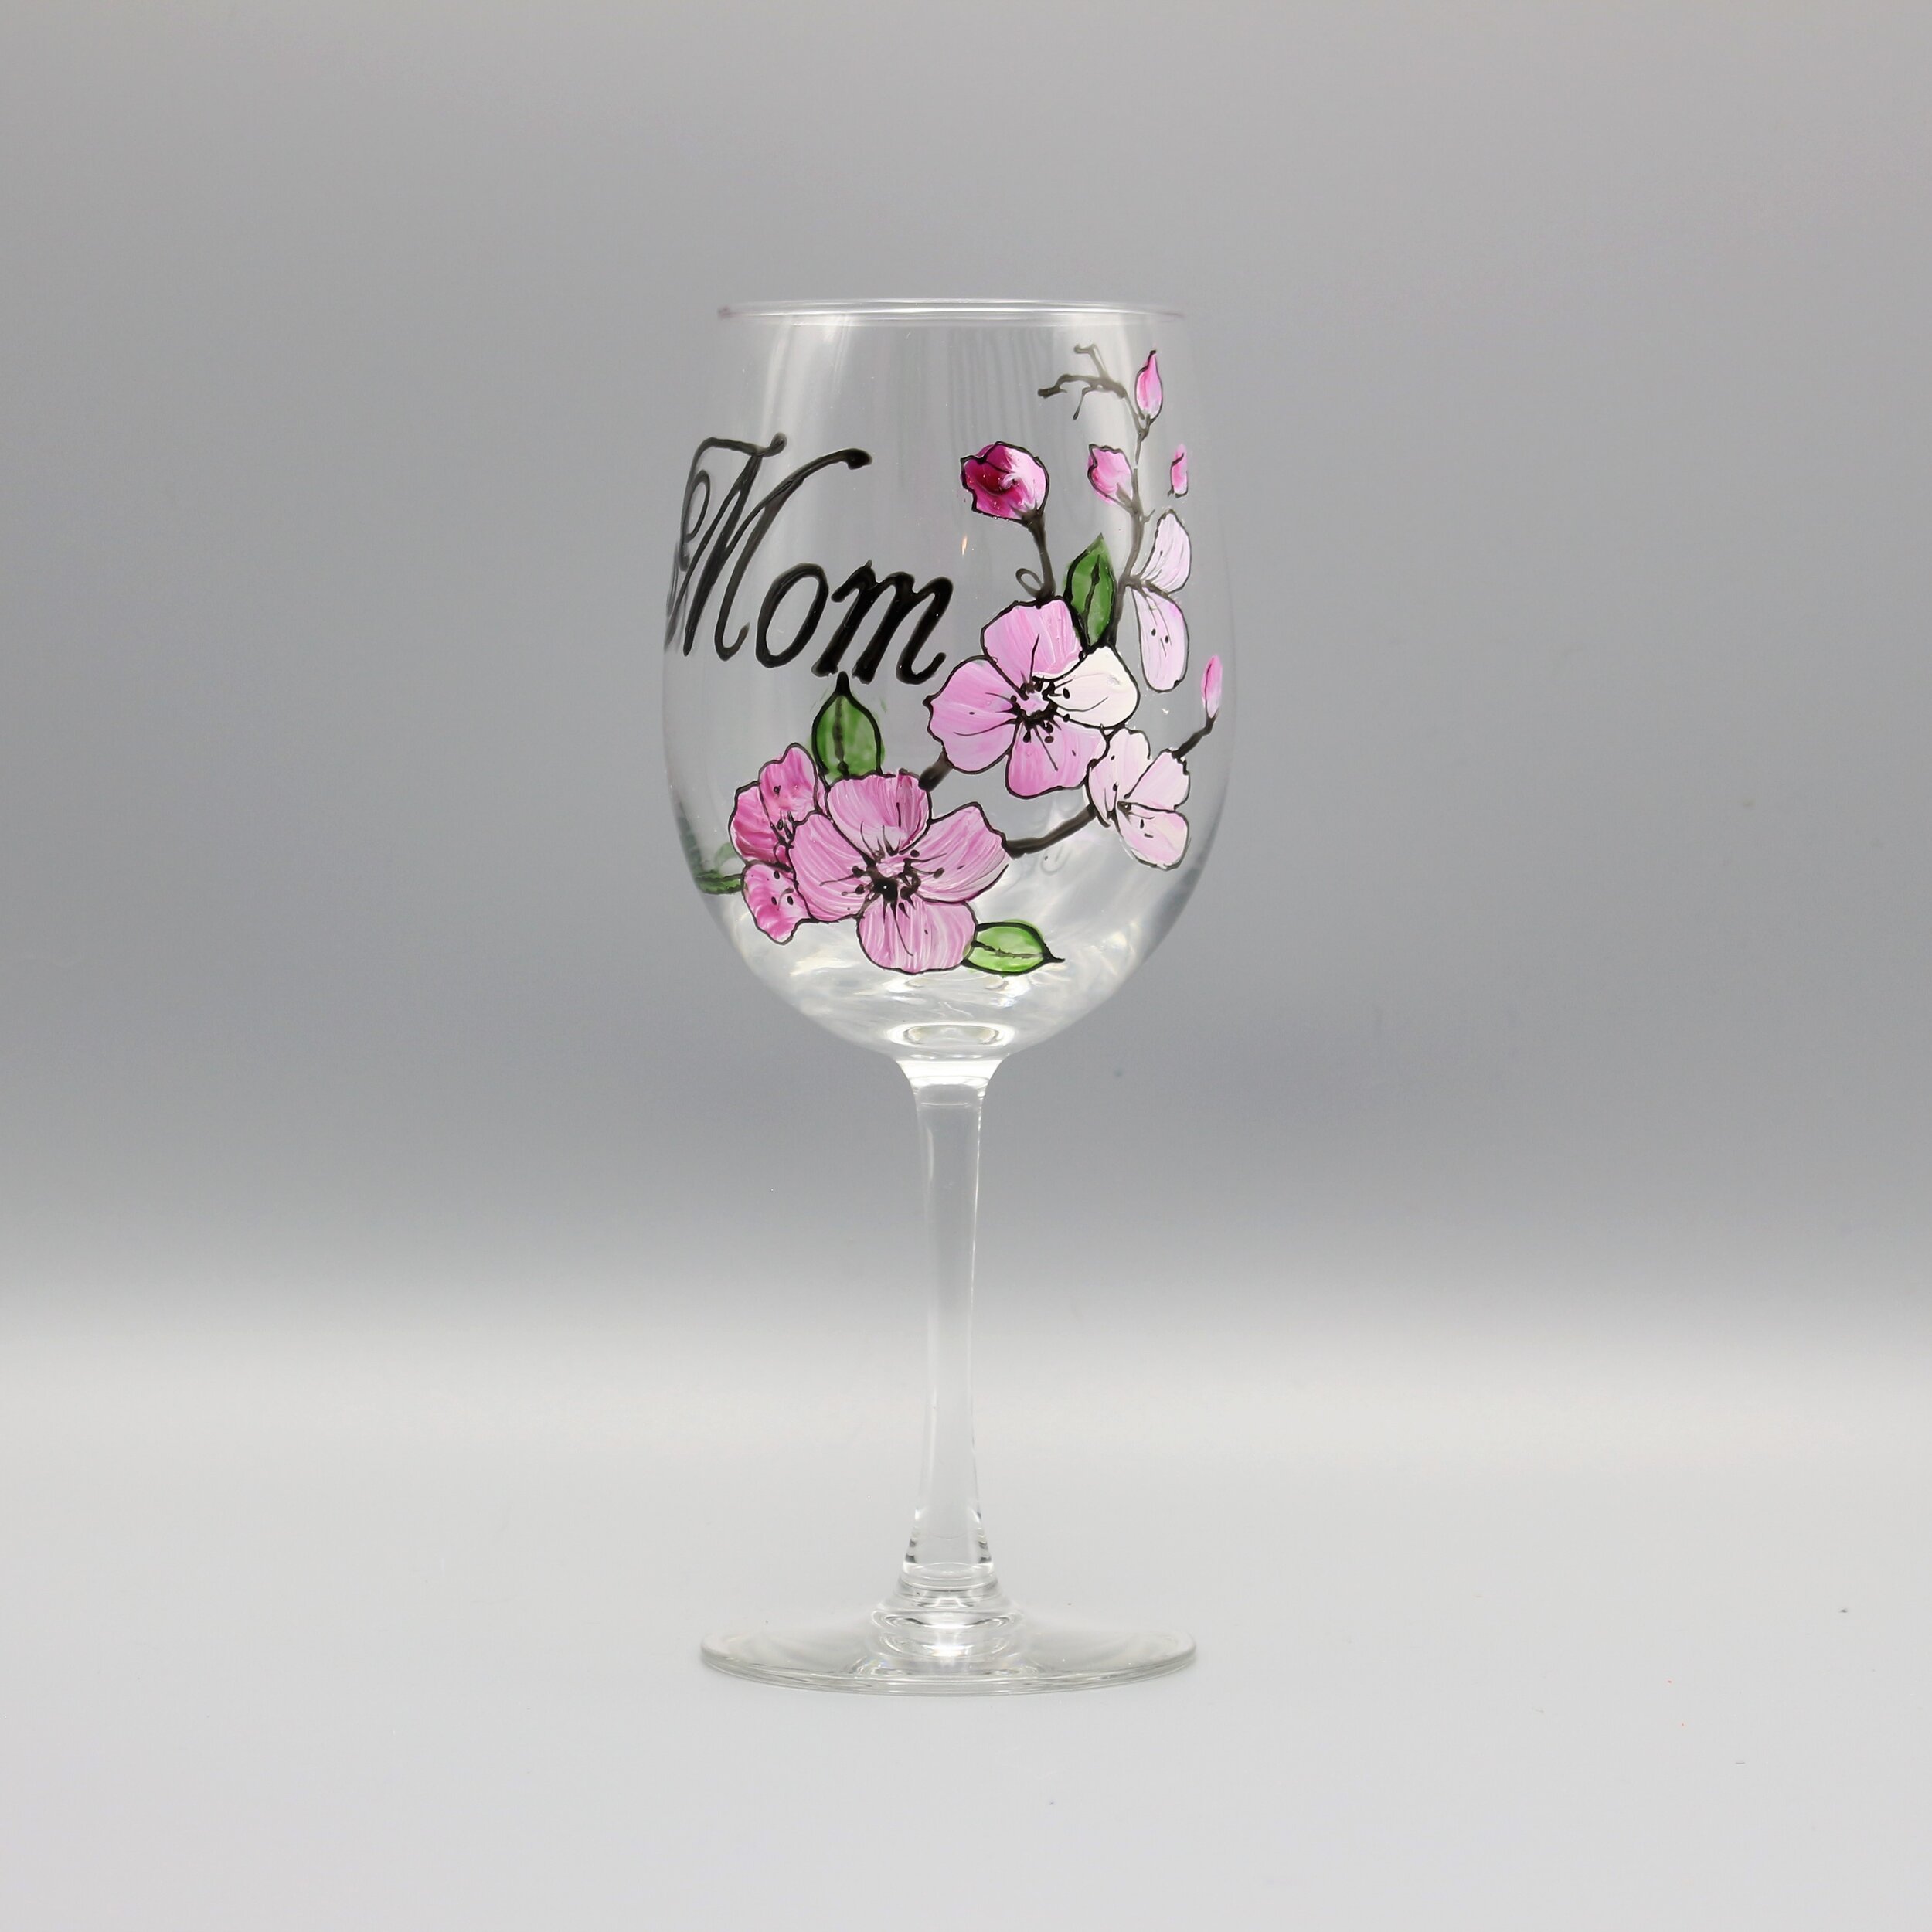 Christmas WG32 Mothers Day Mom Gifts Engraved Mommin Aint Easy Wine Glass With Stem Gift for Her